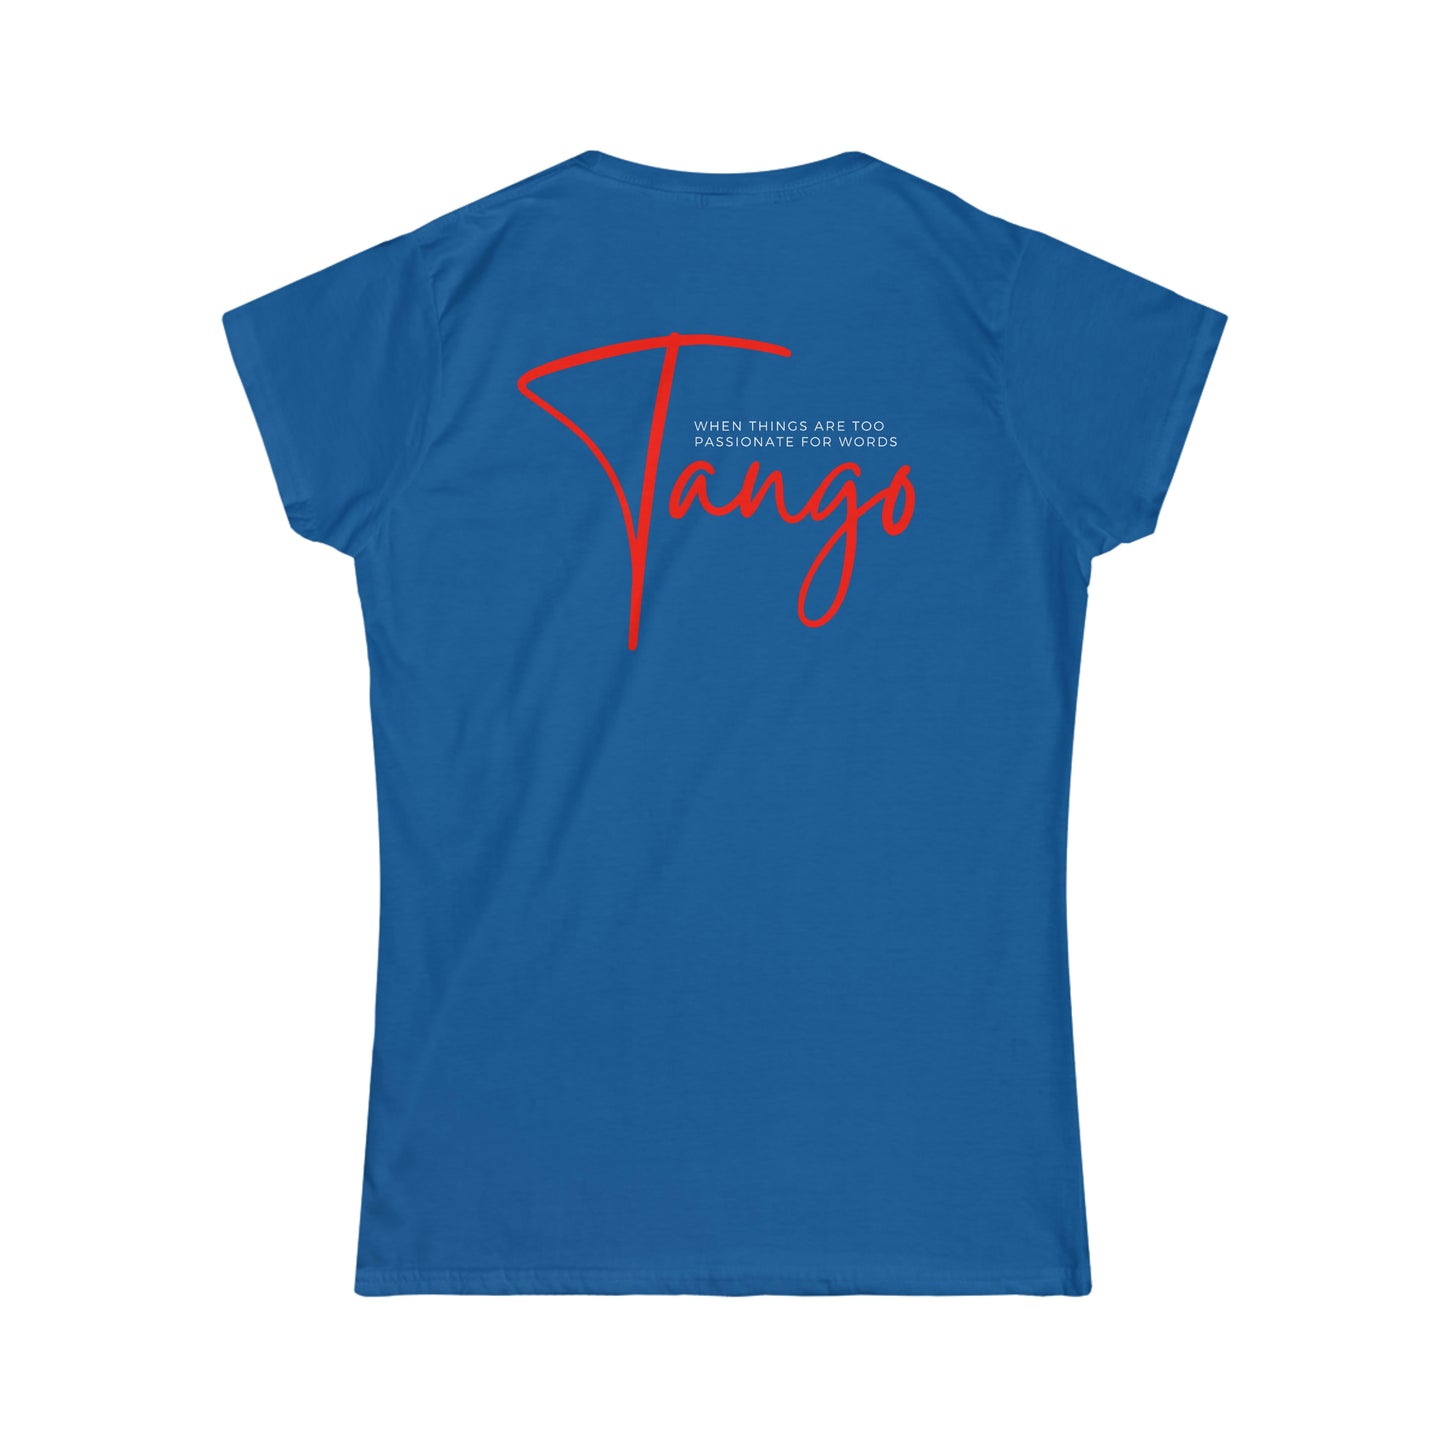 A argentine tango dance tshirt with the text "Tango, when things are to passionate for words"